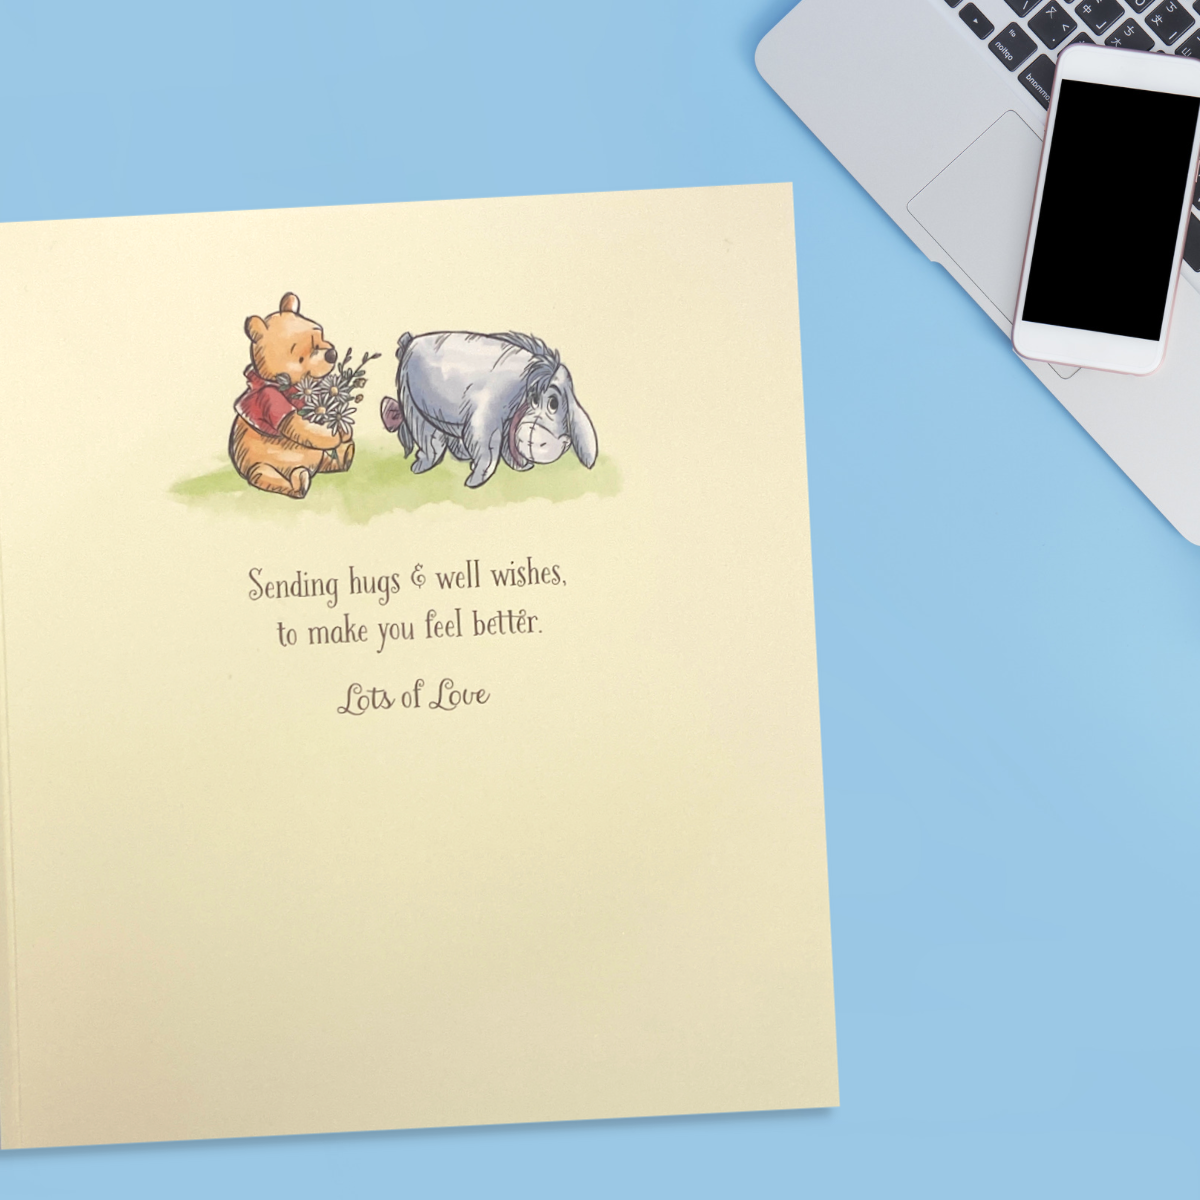 Inside image with colour print, winnie the pooh and eeyore with verse